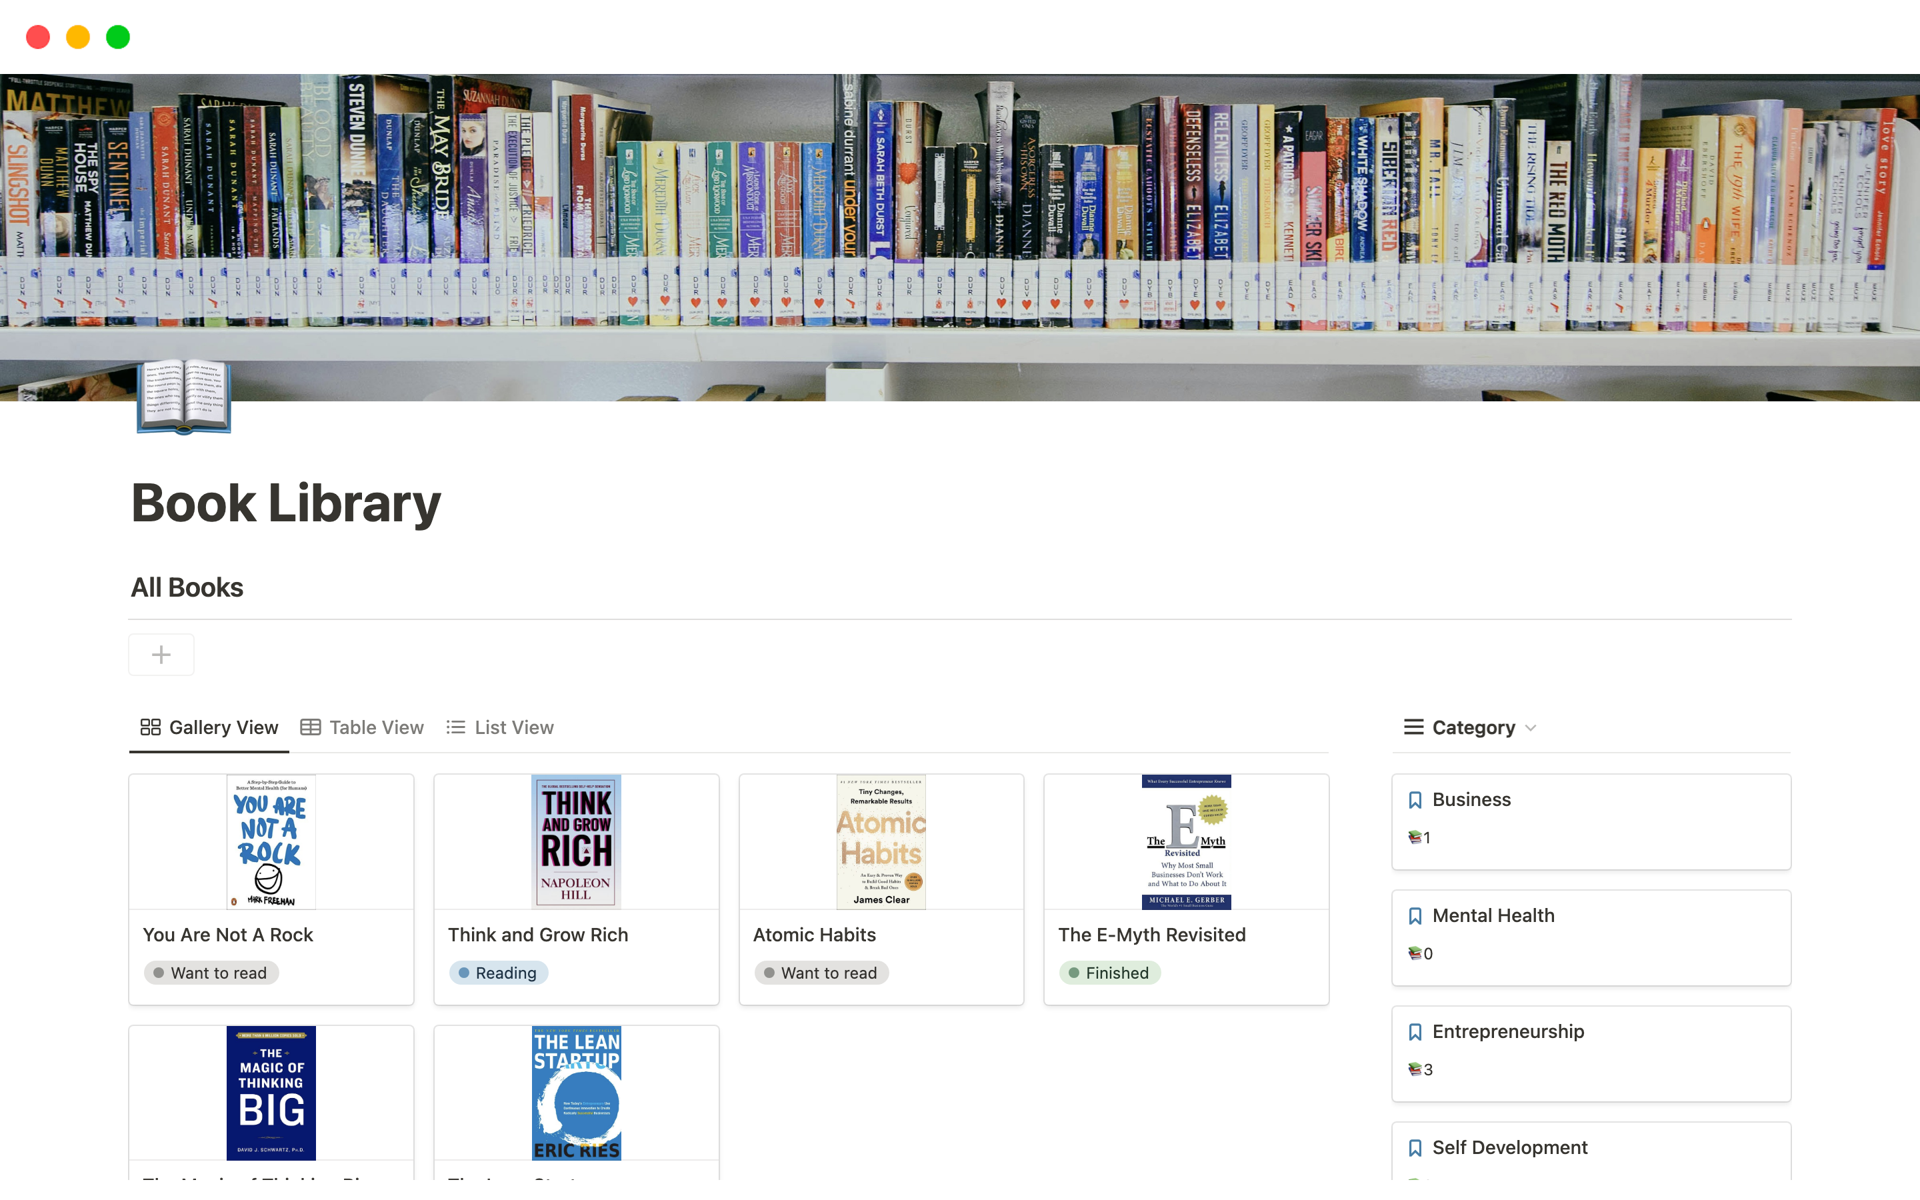 This Notion book library template is a tool for cataloging your book collection, monitoring reading status, and categorizing books for easy access.